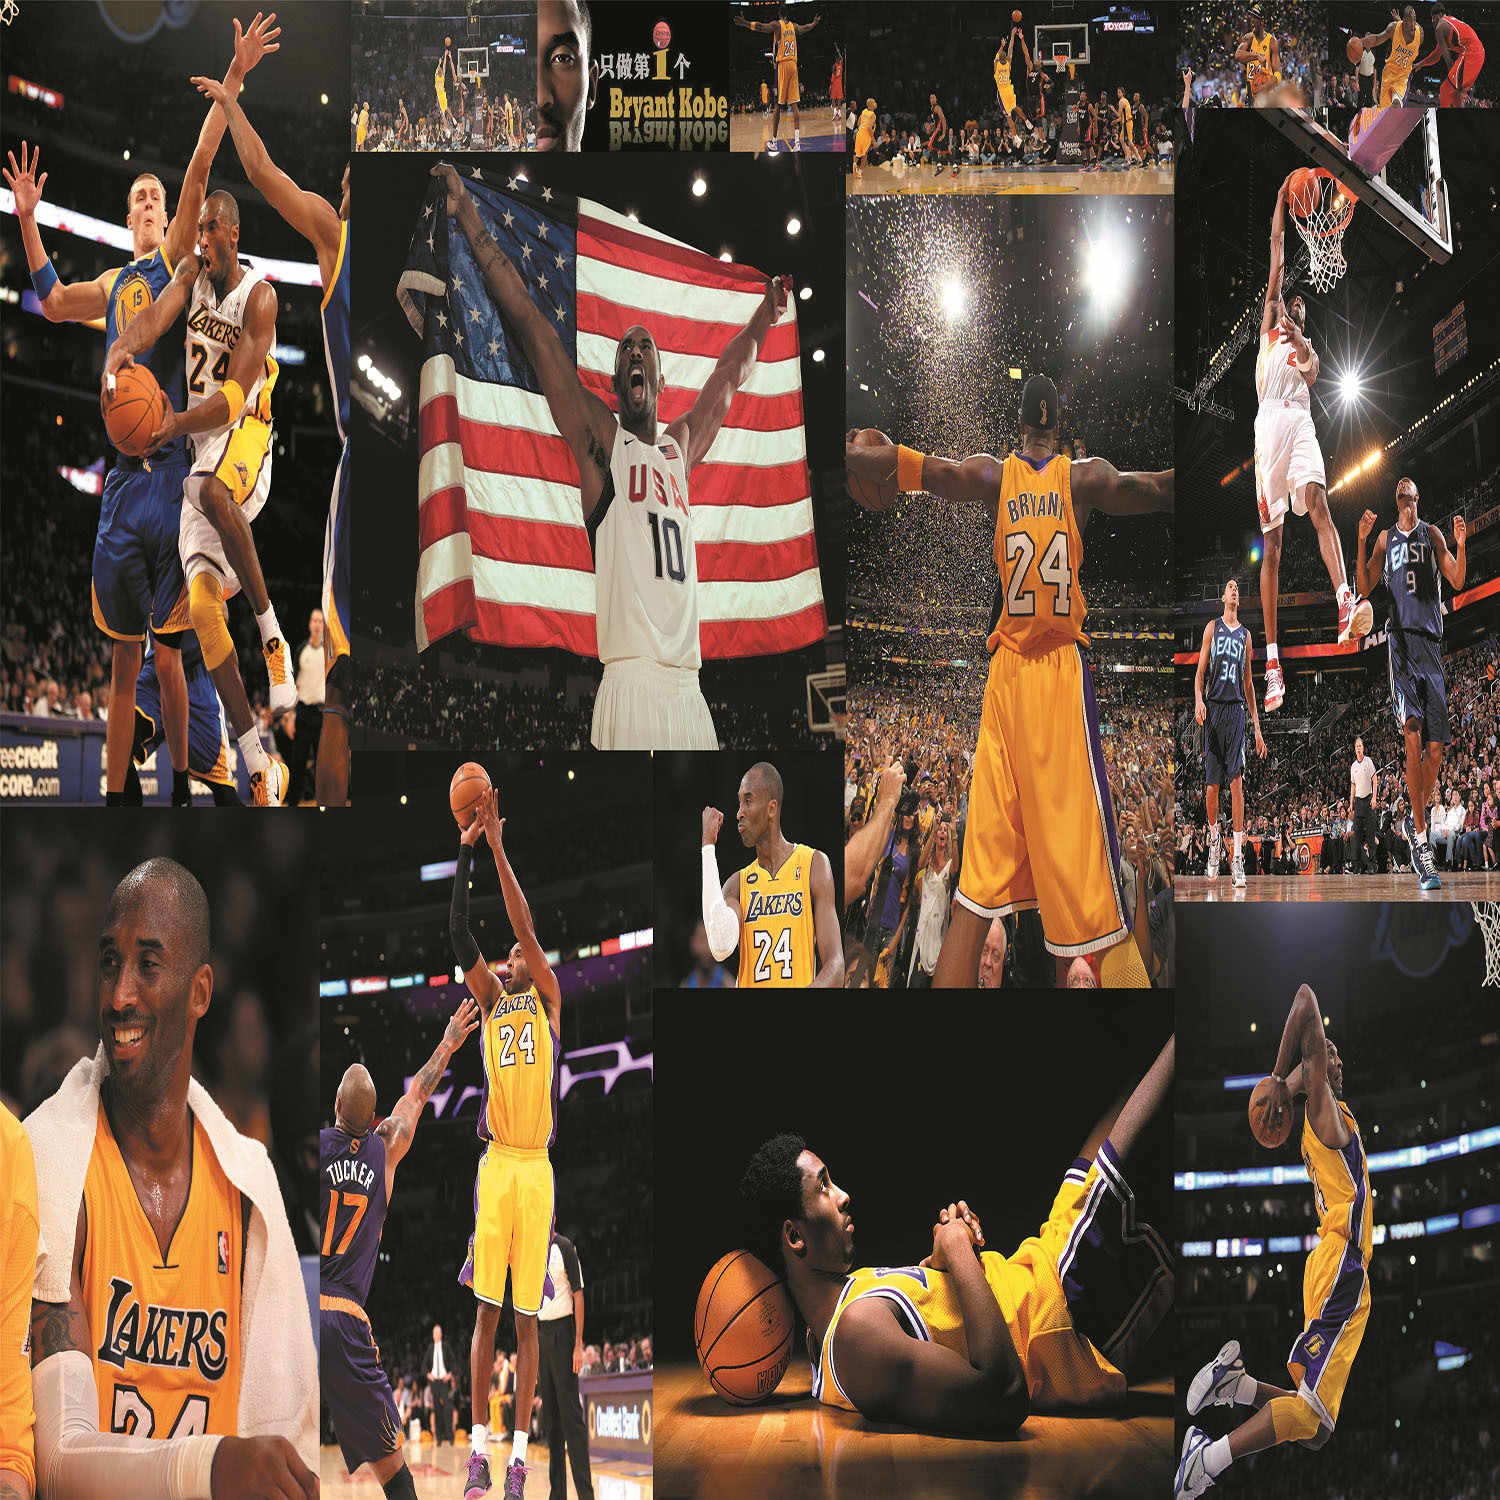 kobe bryant wallpaper,fan,product,basketball player,sports collectible,cheering